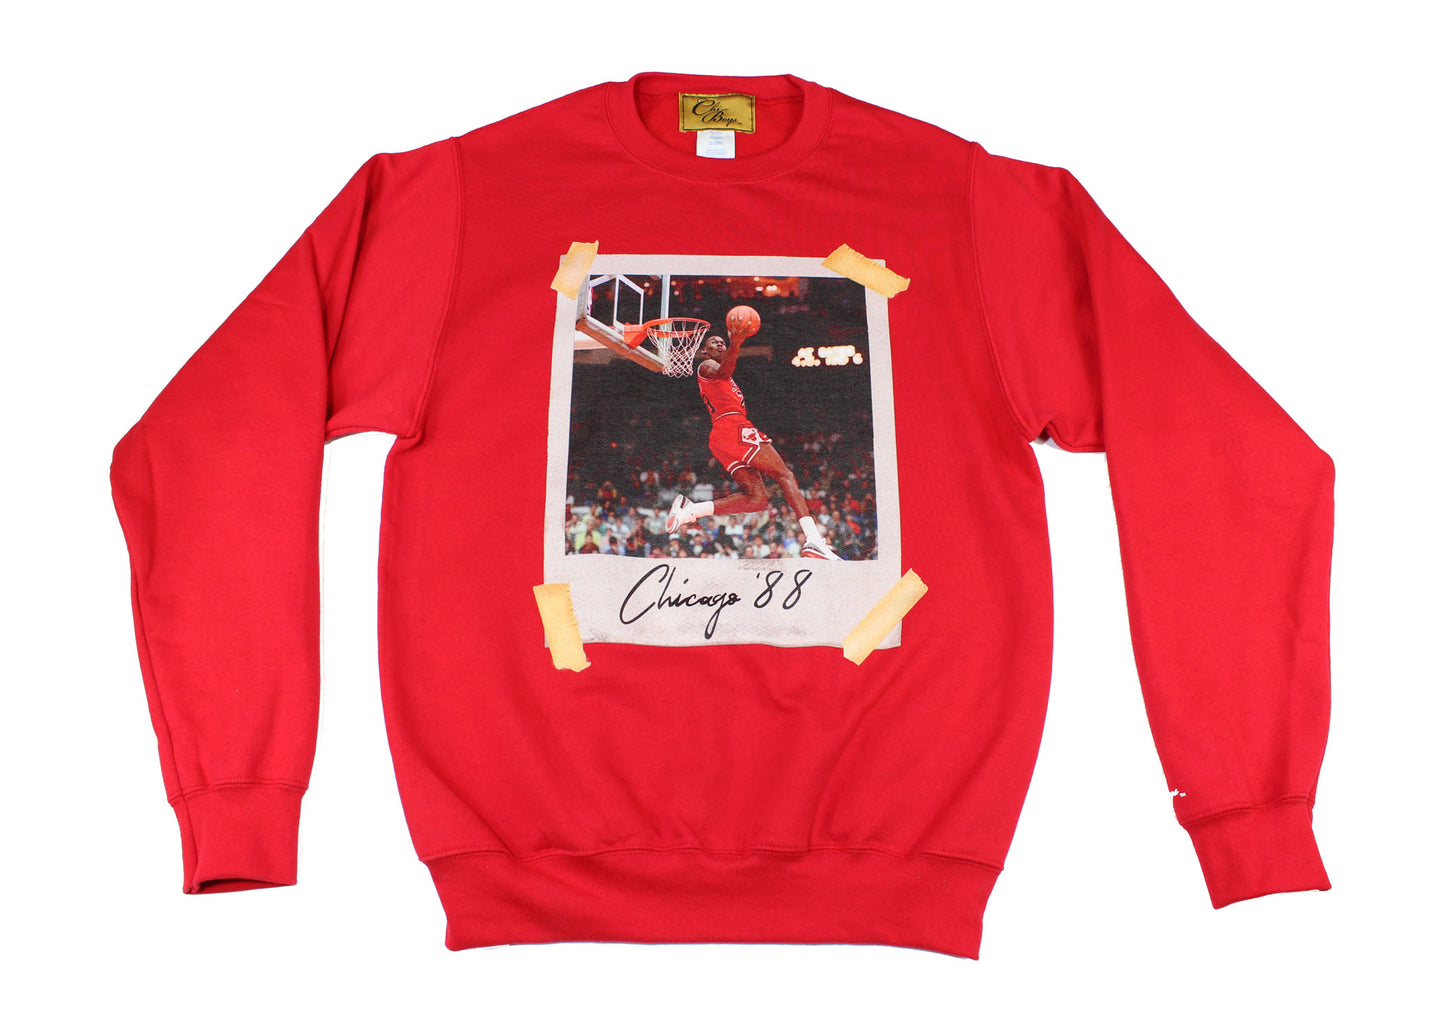 Chicago '88 Pay Homage (Red)